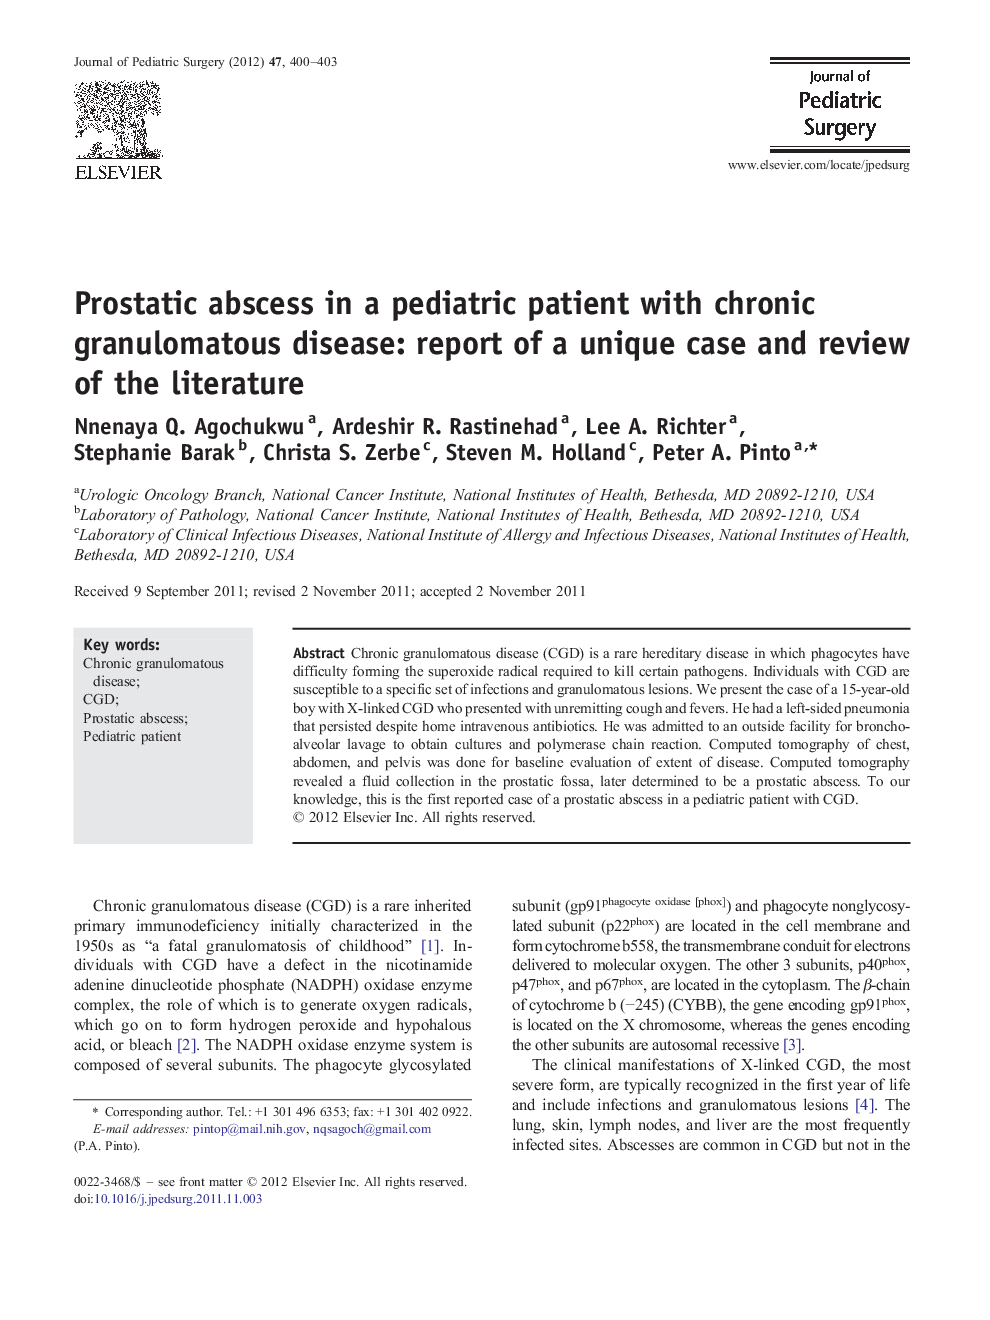 Prostatic abscess in a pediatric patient with chronic granulomatous disease: report of a unique case and review of the literature